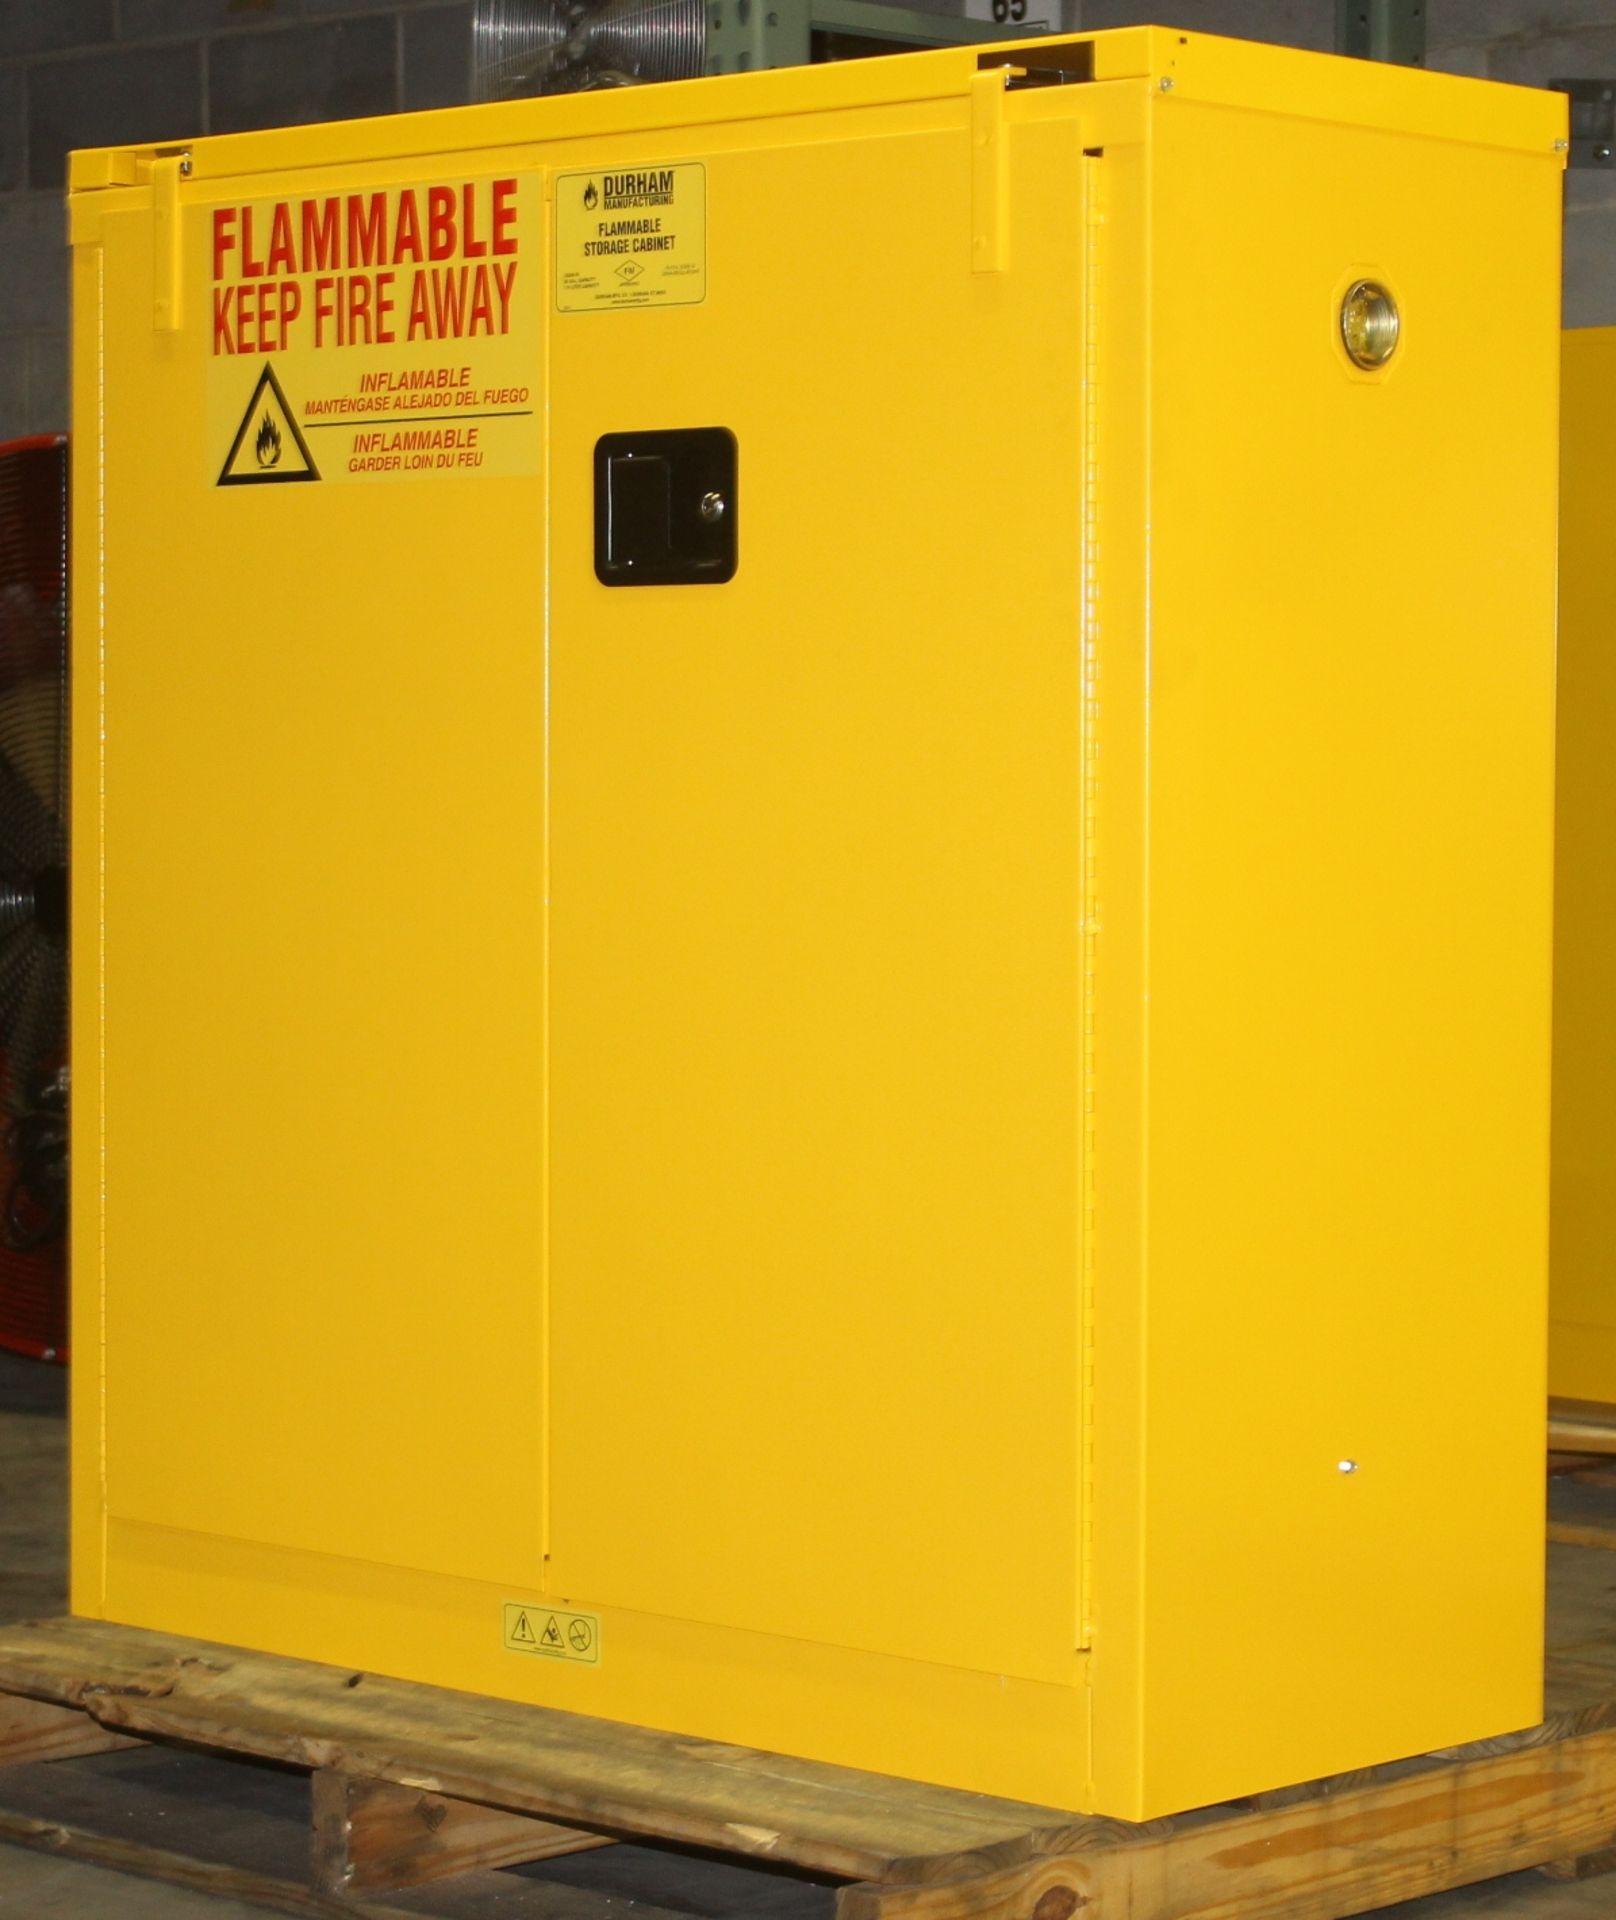 30 GALLONS FLAMMABLE SAFETY STORAGE CABINET,  NEW NEVER USED MANUAL CLOSING, 30 GALLONS CAPACITY, - Image 3 of 3